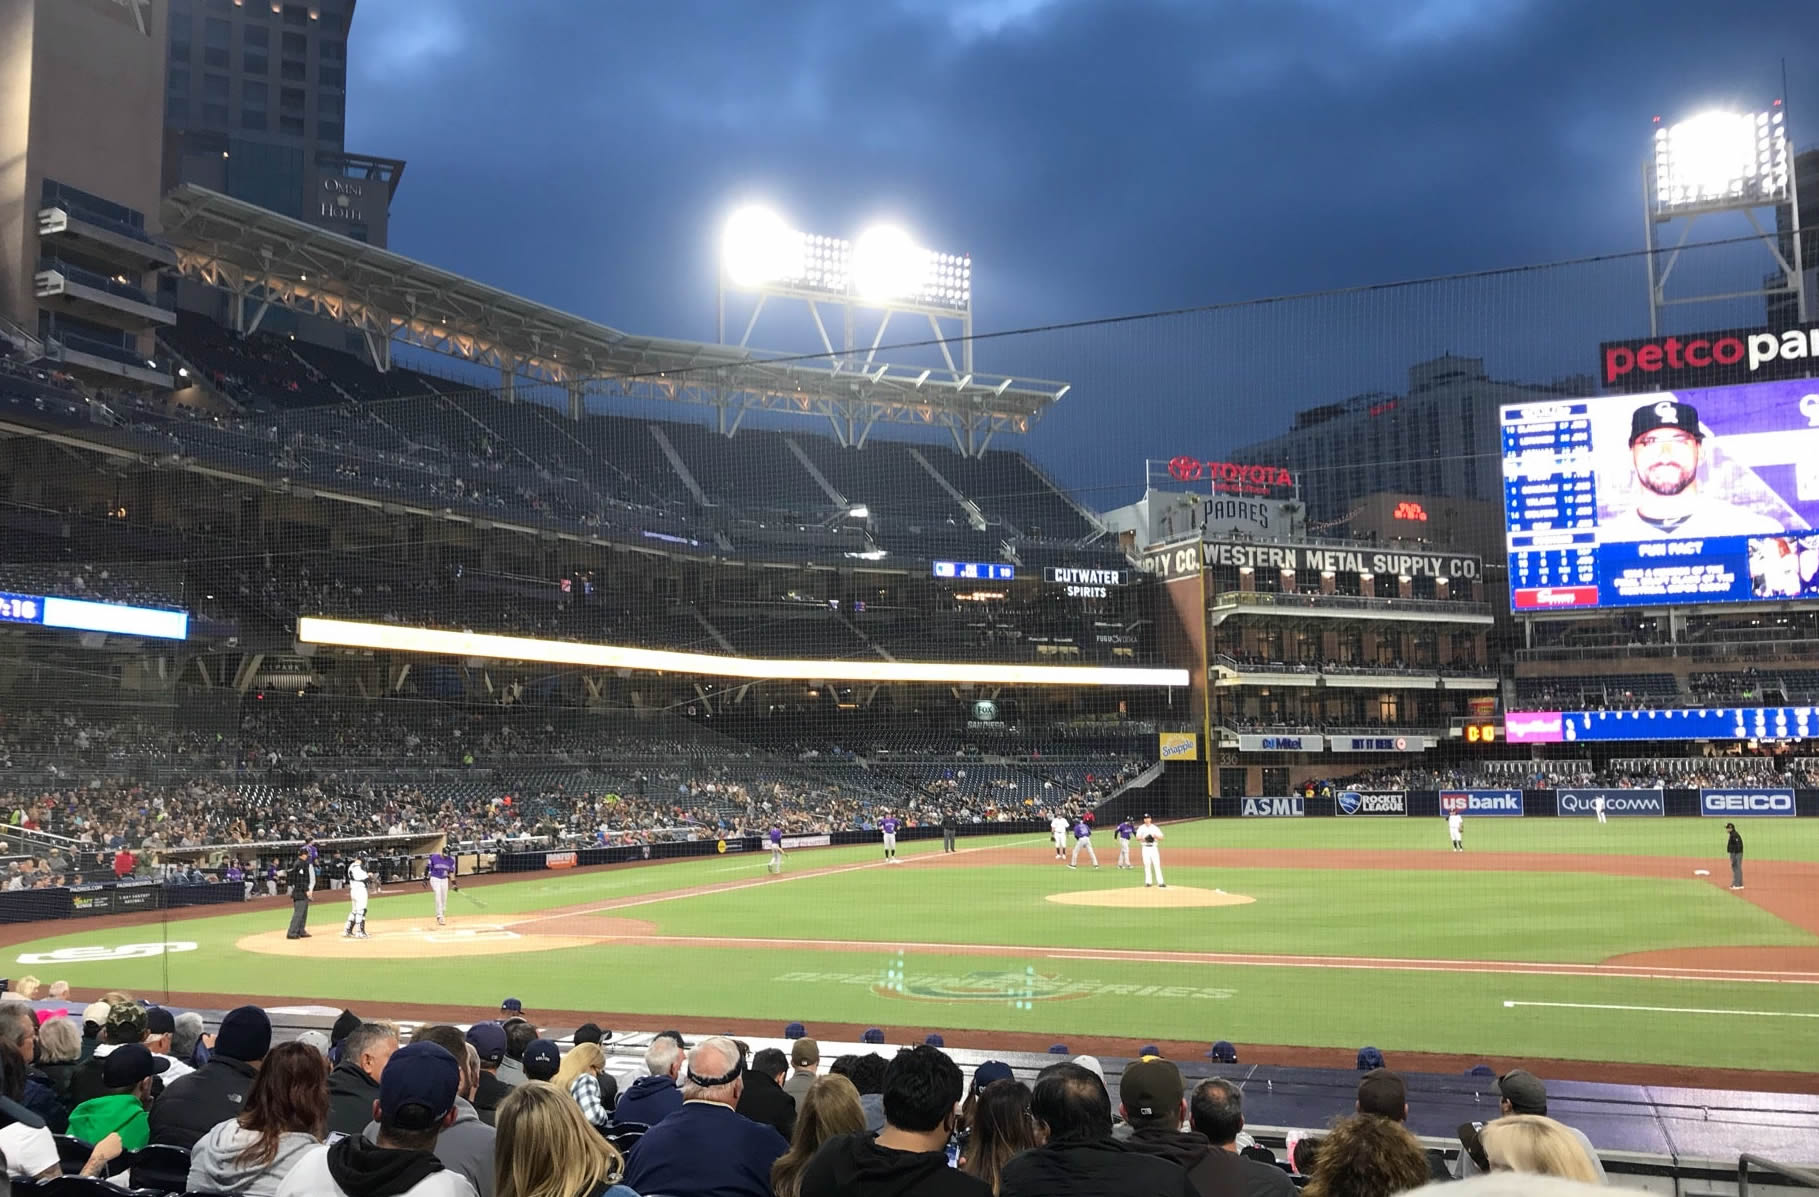 section 107, row 14 seat view  for baseball - petco park